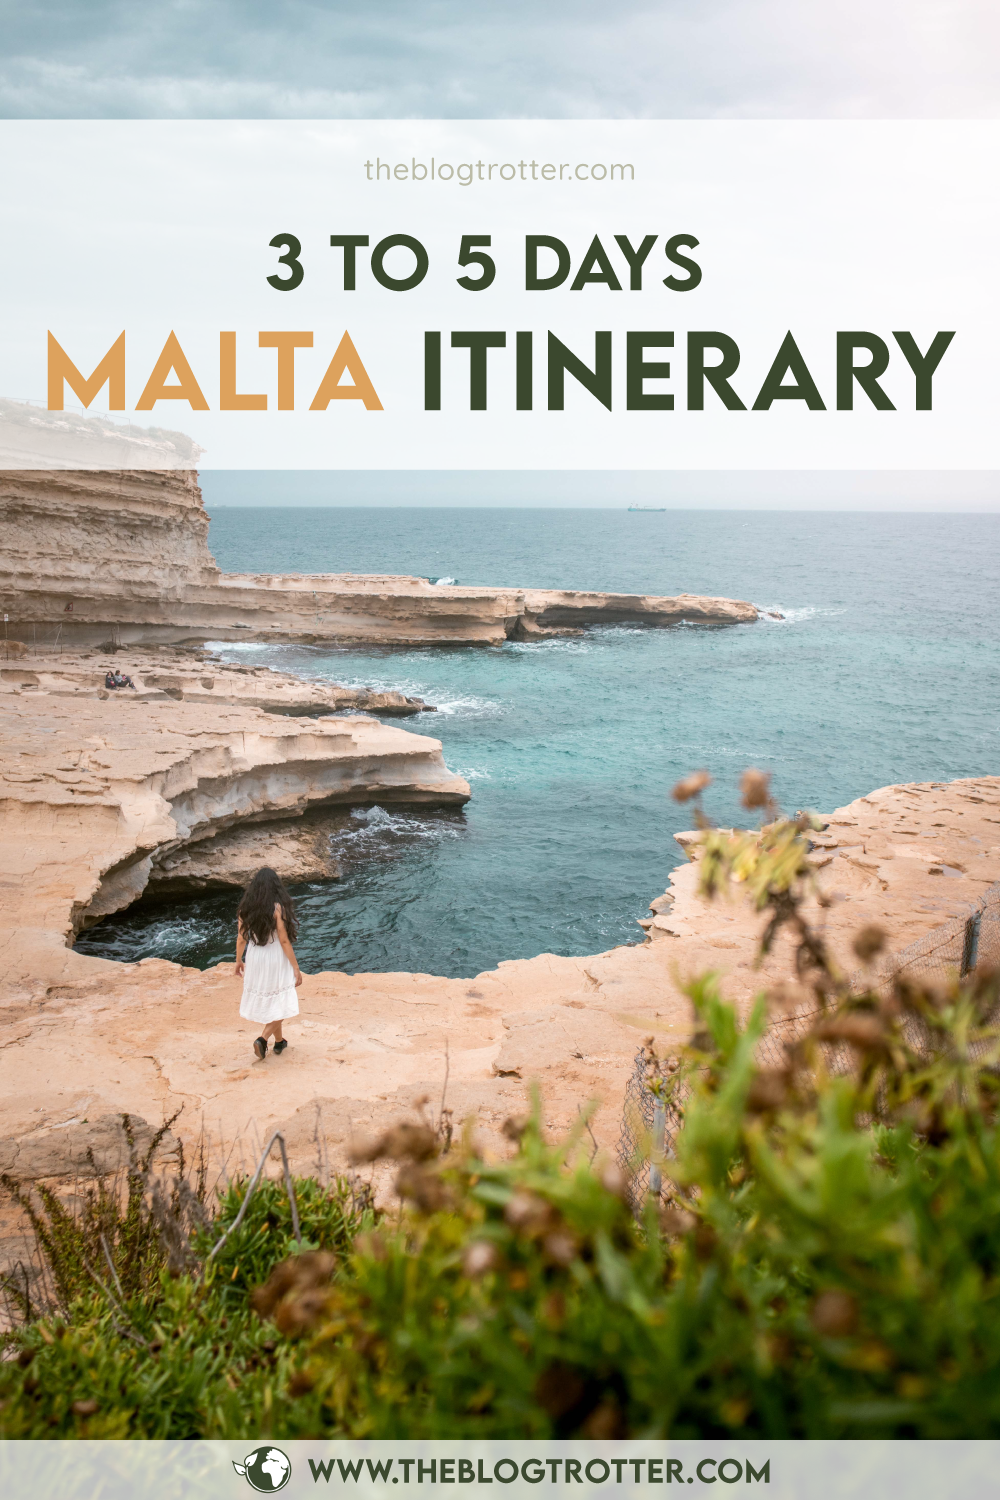 Malta itinerary article visual for Pinterest - Option 2